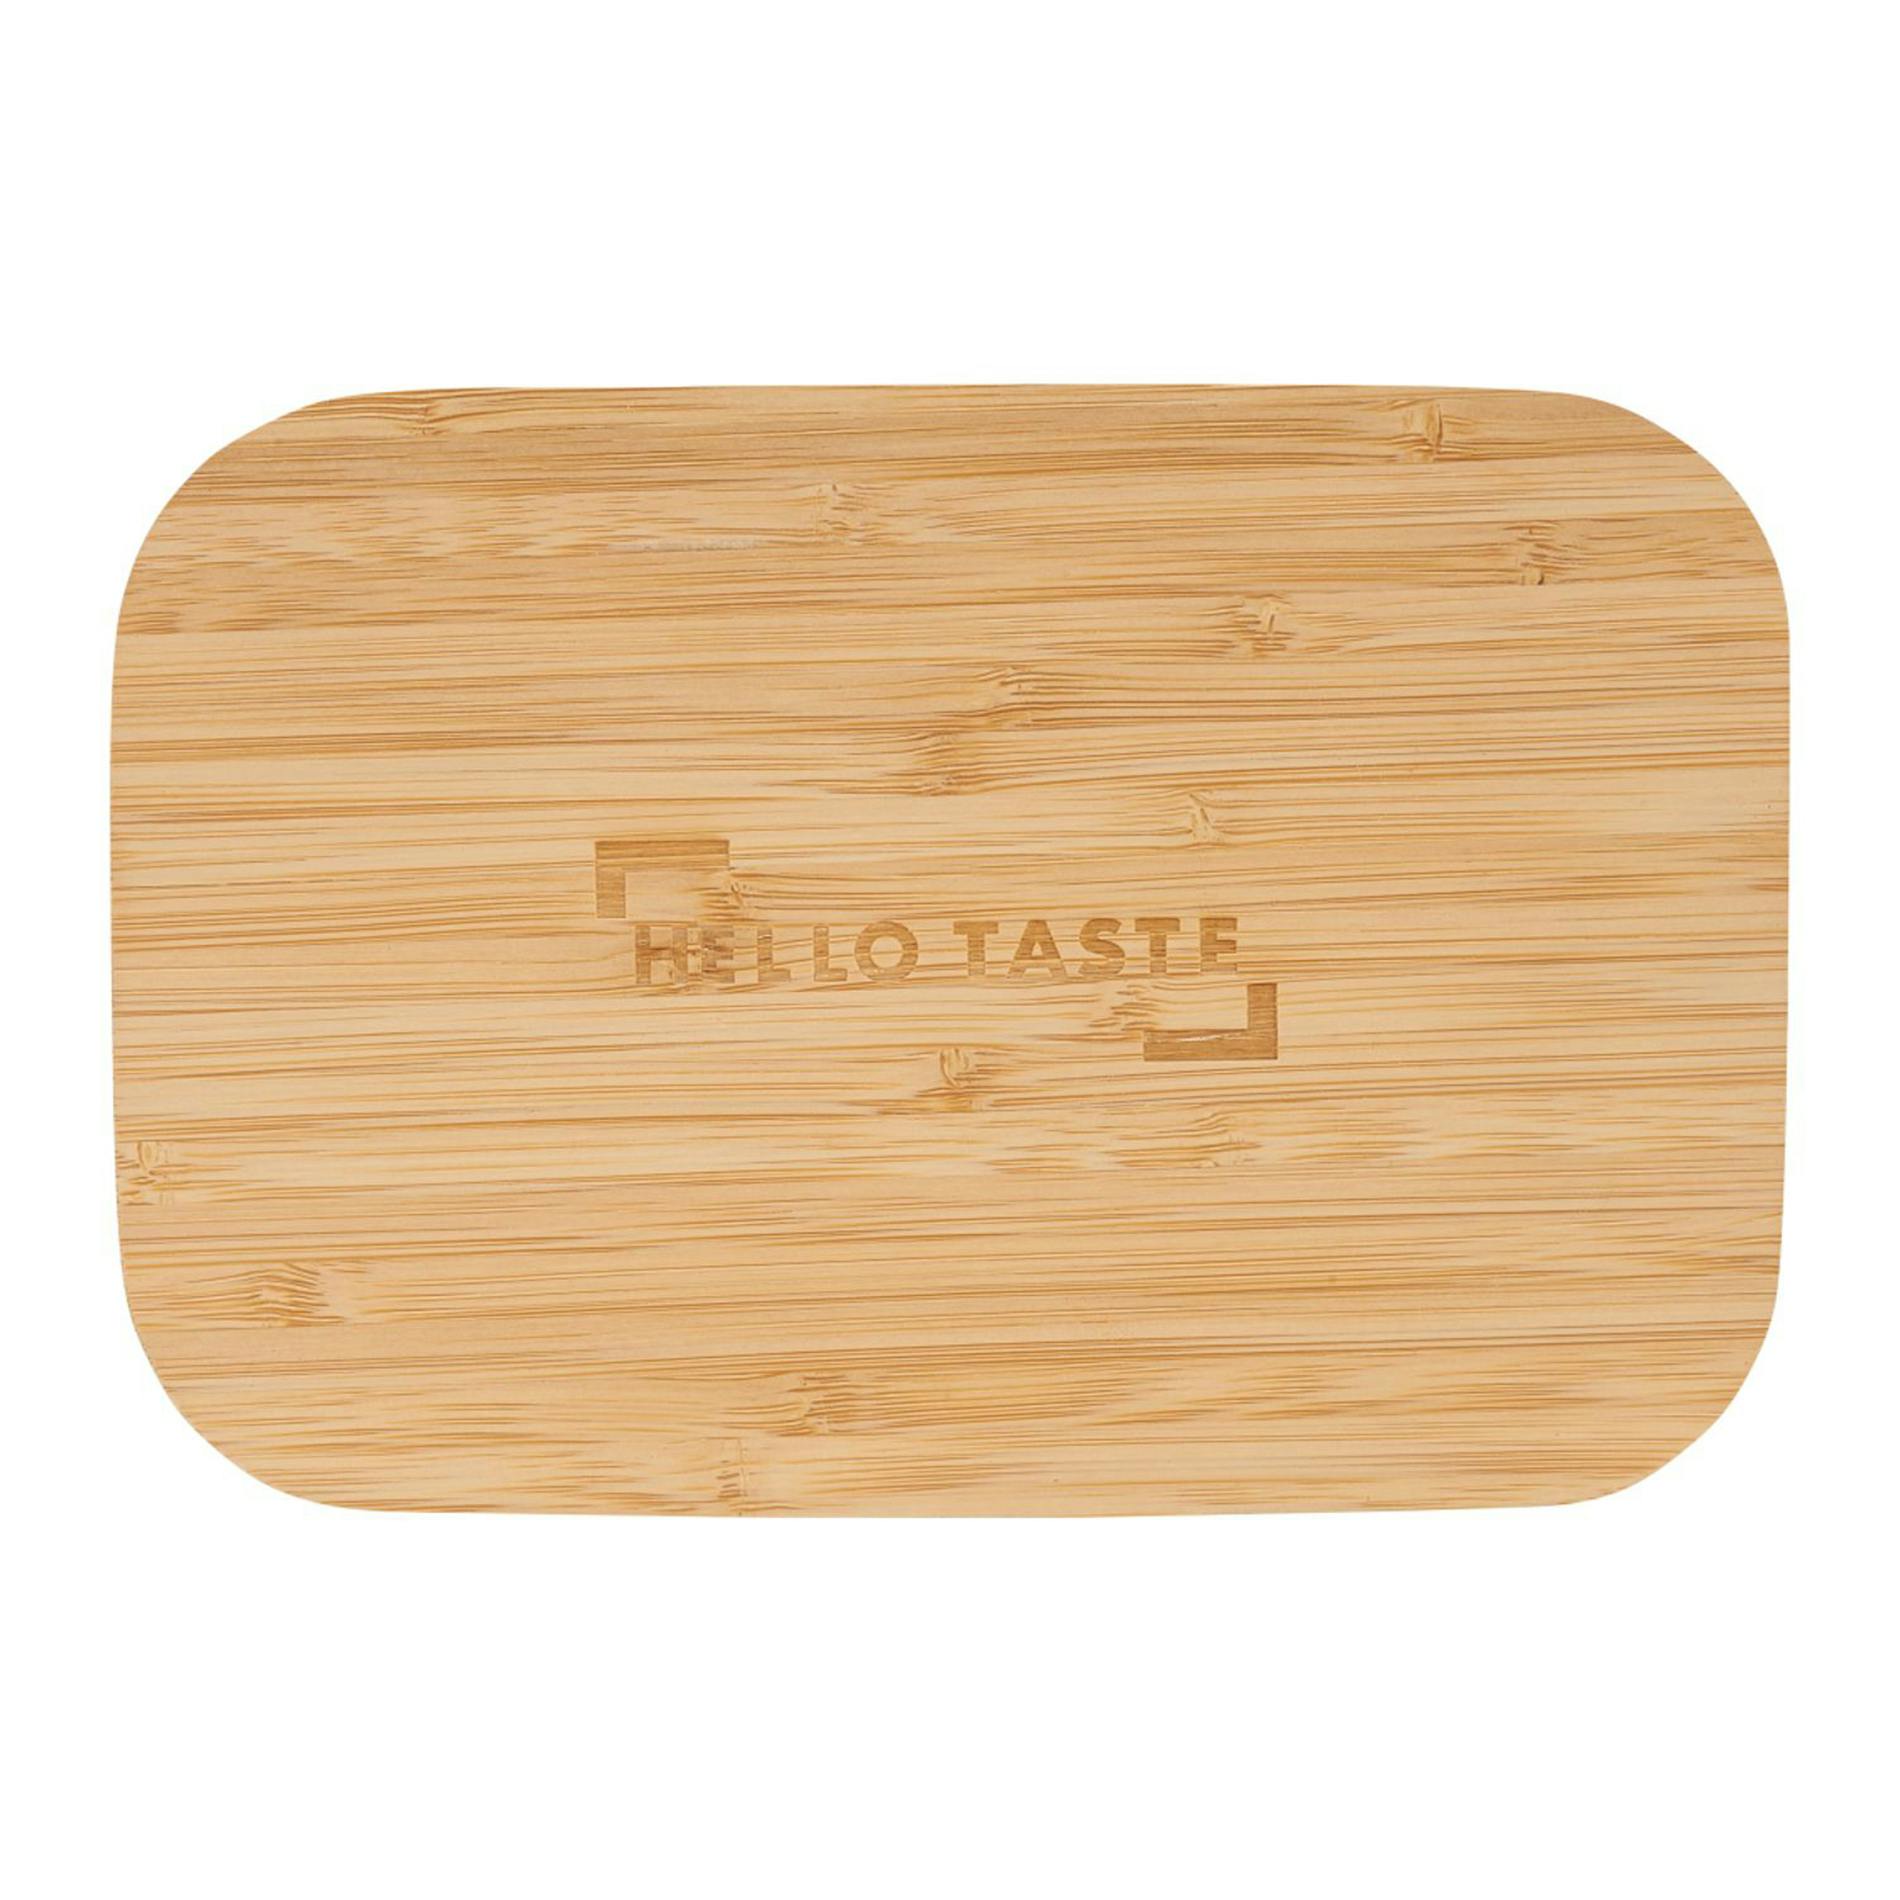 Bamboo Fiber Lunch Box with Cutting Board Lid - additional Image 3